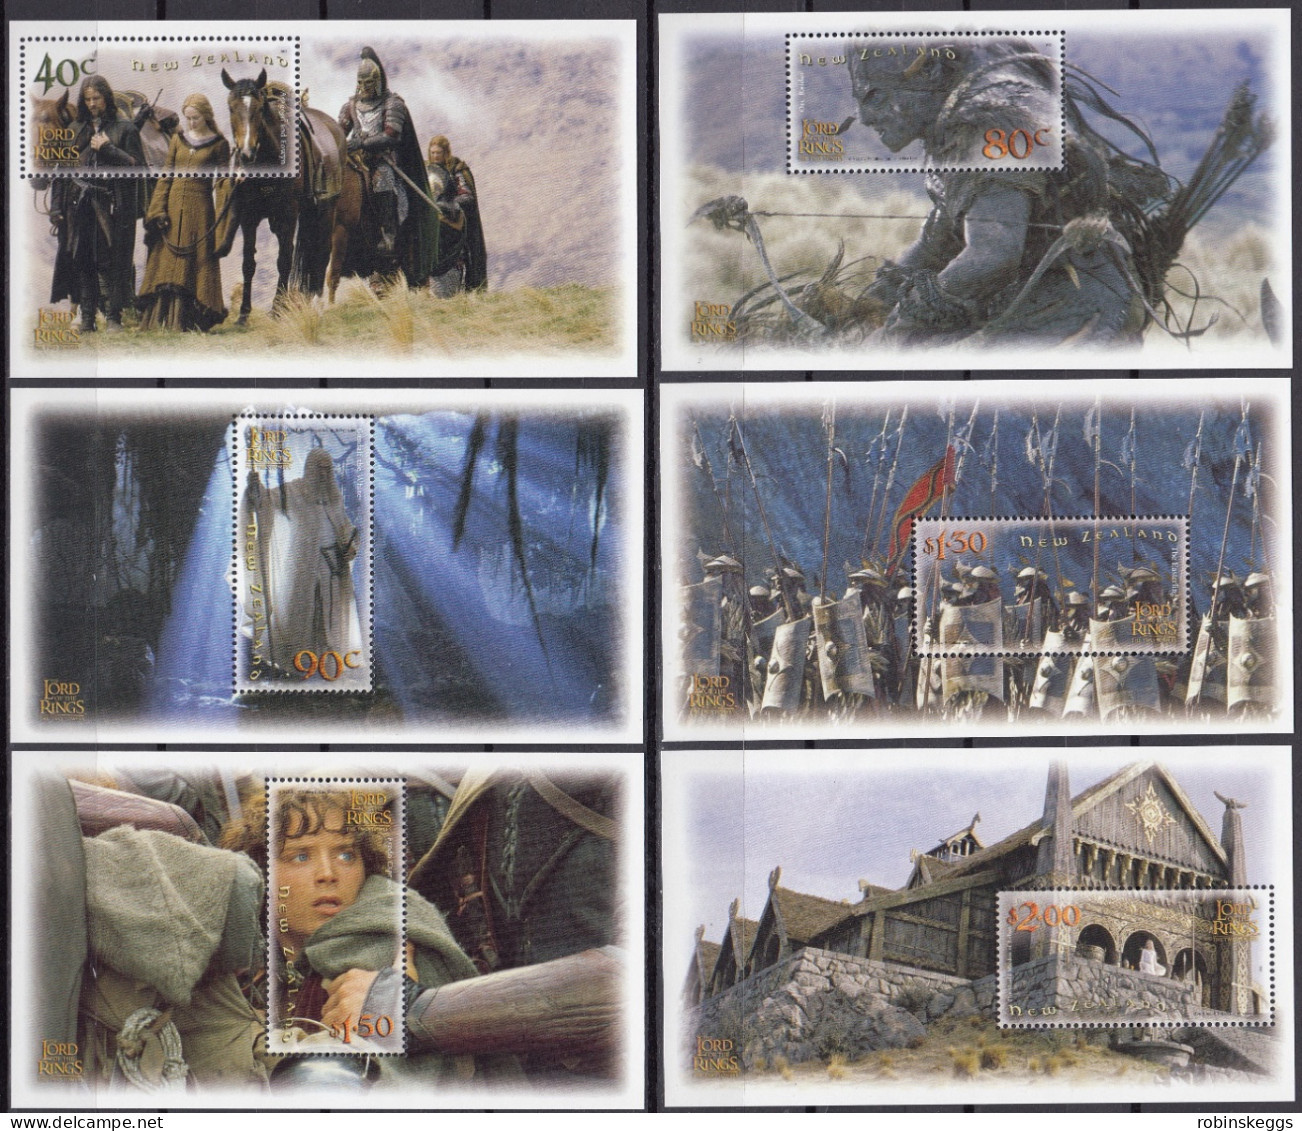 NEW ZEALAND 2002 Lord Of The Rings: The Two Towers, Set Of 6 M/S’s MNH - Fantasie Vignetten